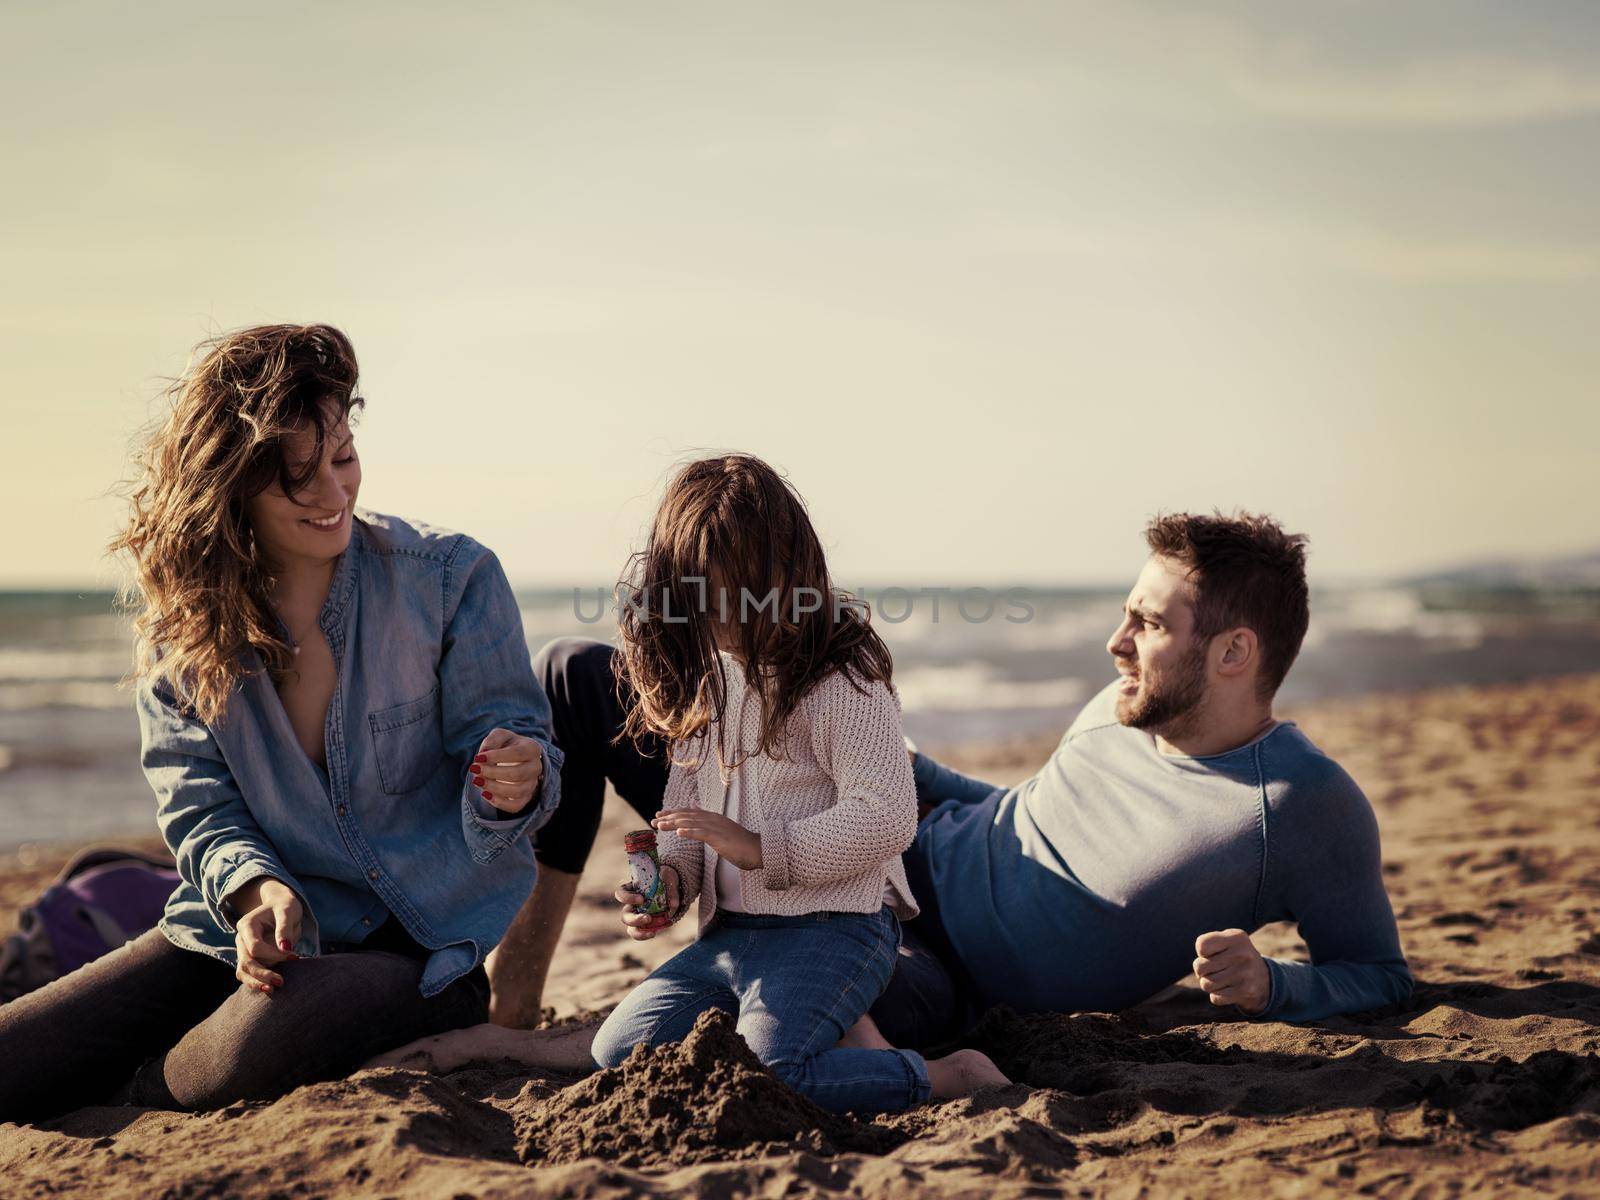 Family with little daughter resting and having fun at beach during autumn day colored filter